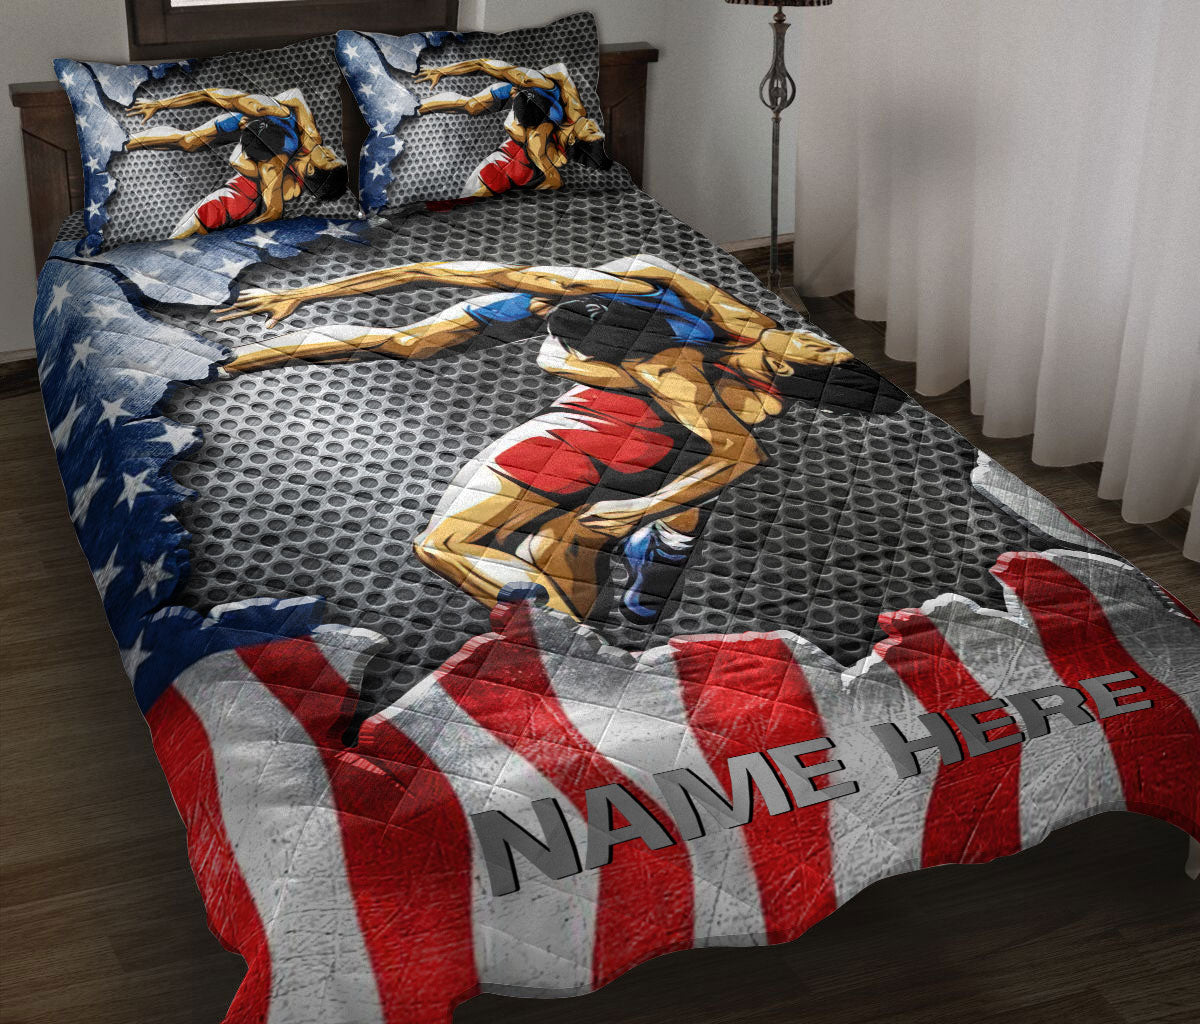 Ohaprints-Quilt-Bed-Set-Pillowcase-Wrestling-Sport-Lover-Gift-Us-American-Flag-Custom-Personalized-Name-Number-Blanket-Bedspread-Bedding-3242-Throw (55'' x 60'')